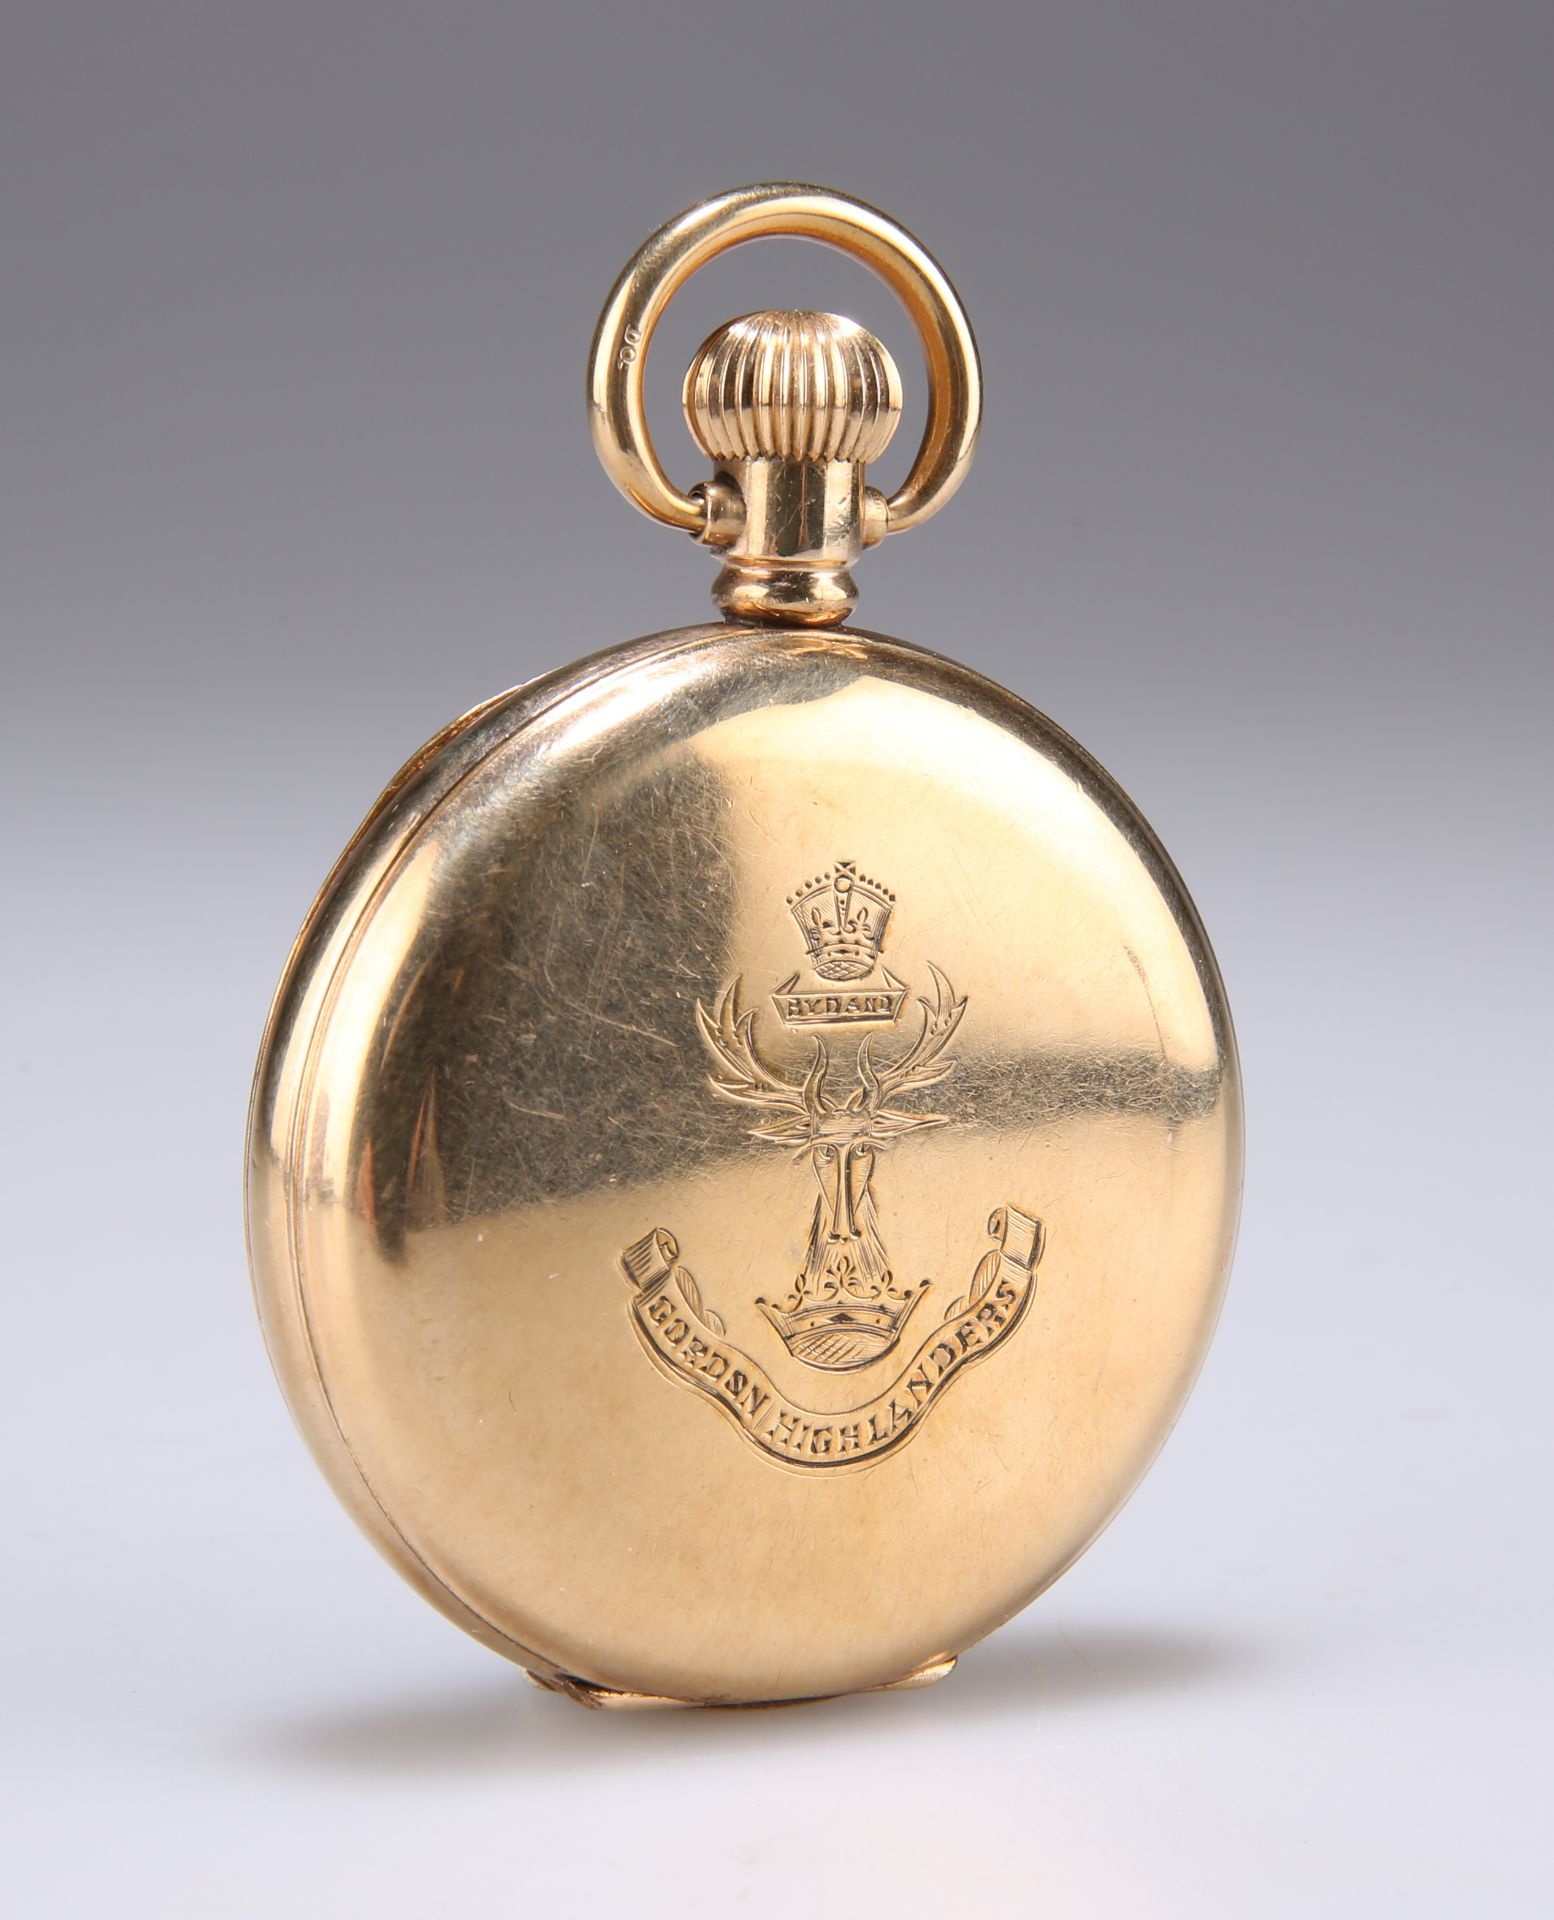 A GOLD-PLATED FULL HUNTER POCKET WATCH